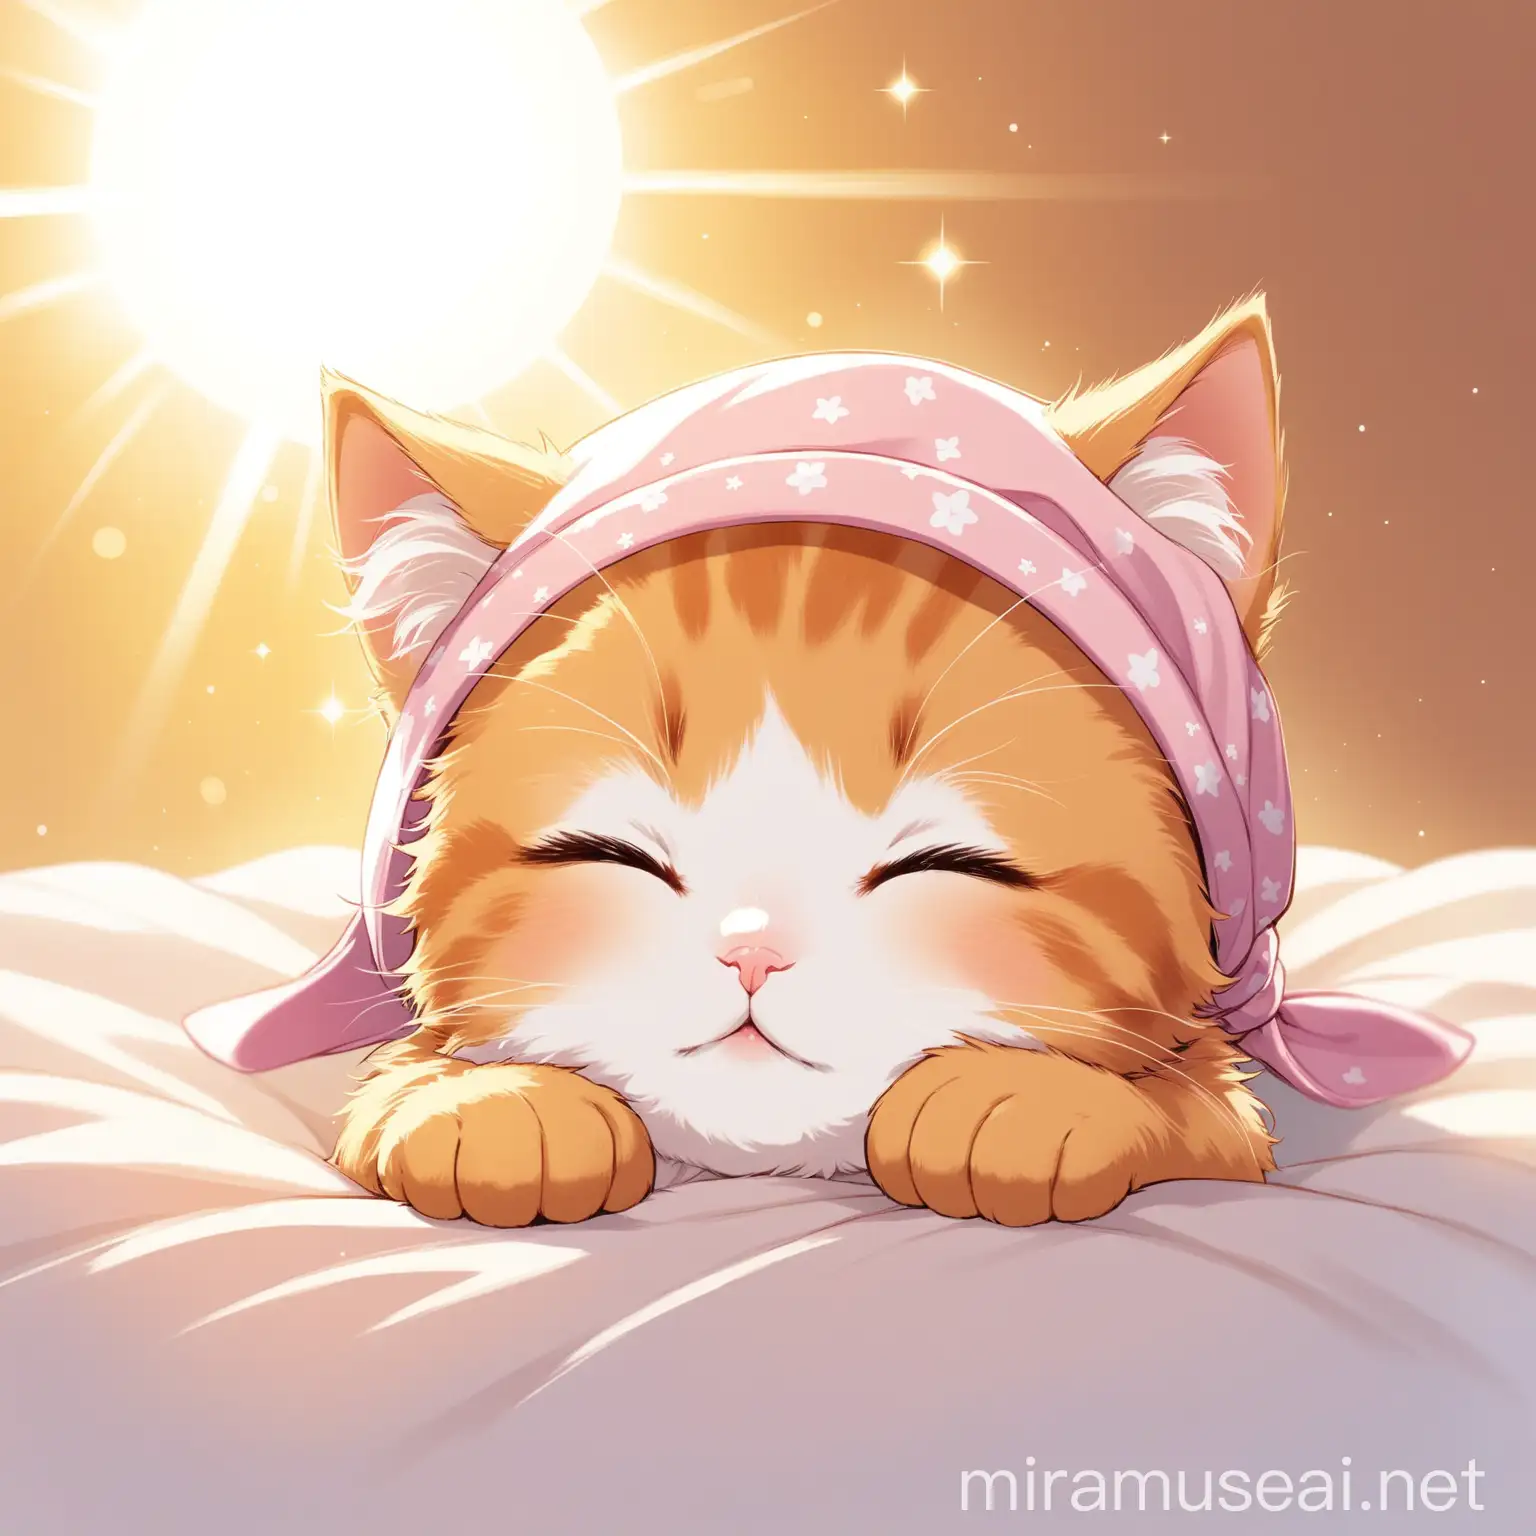 Morning Bliss Kitten Stretching in Sunlight with Sleep Cap